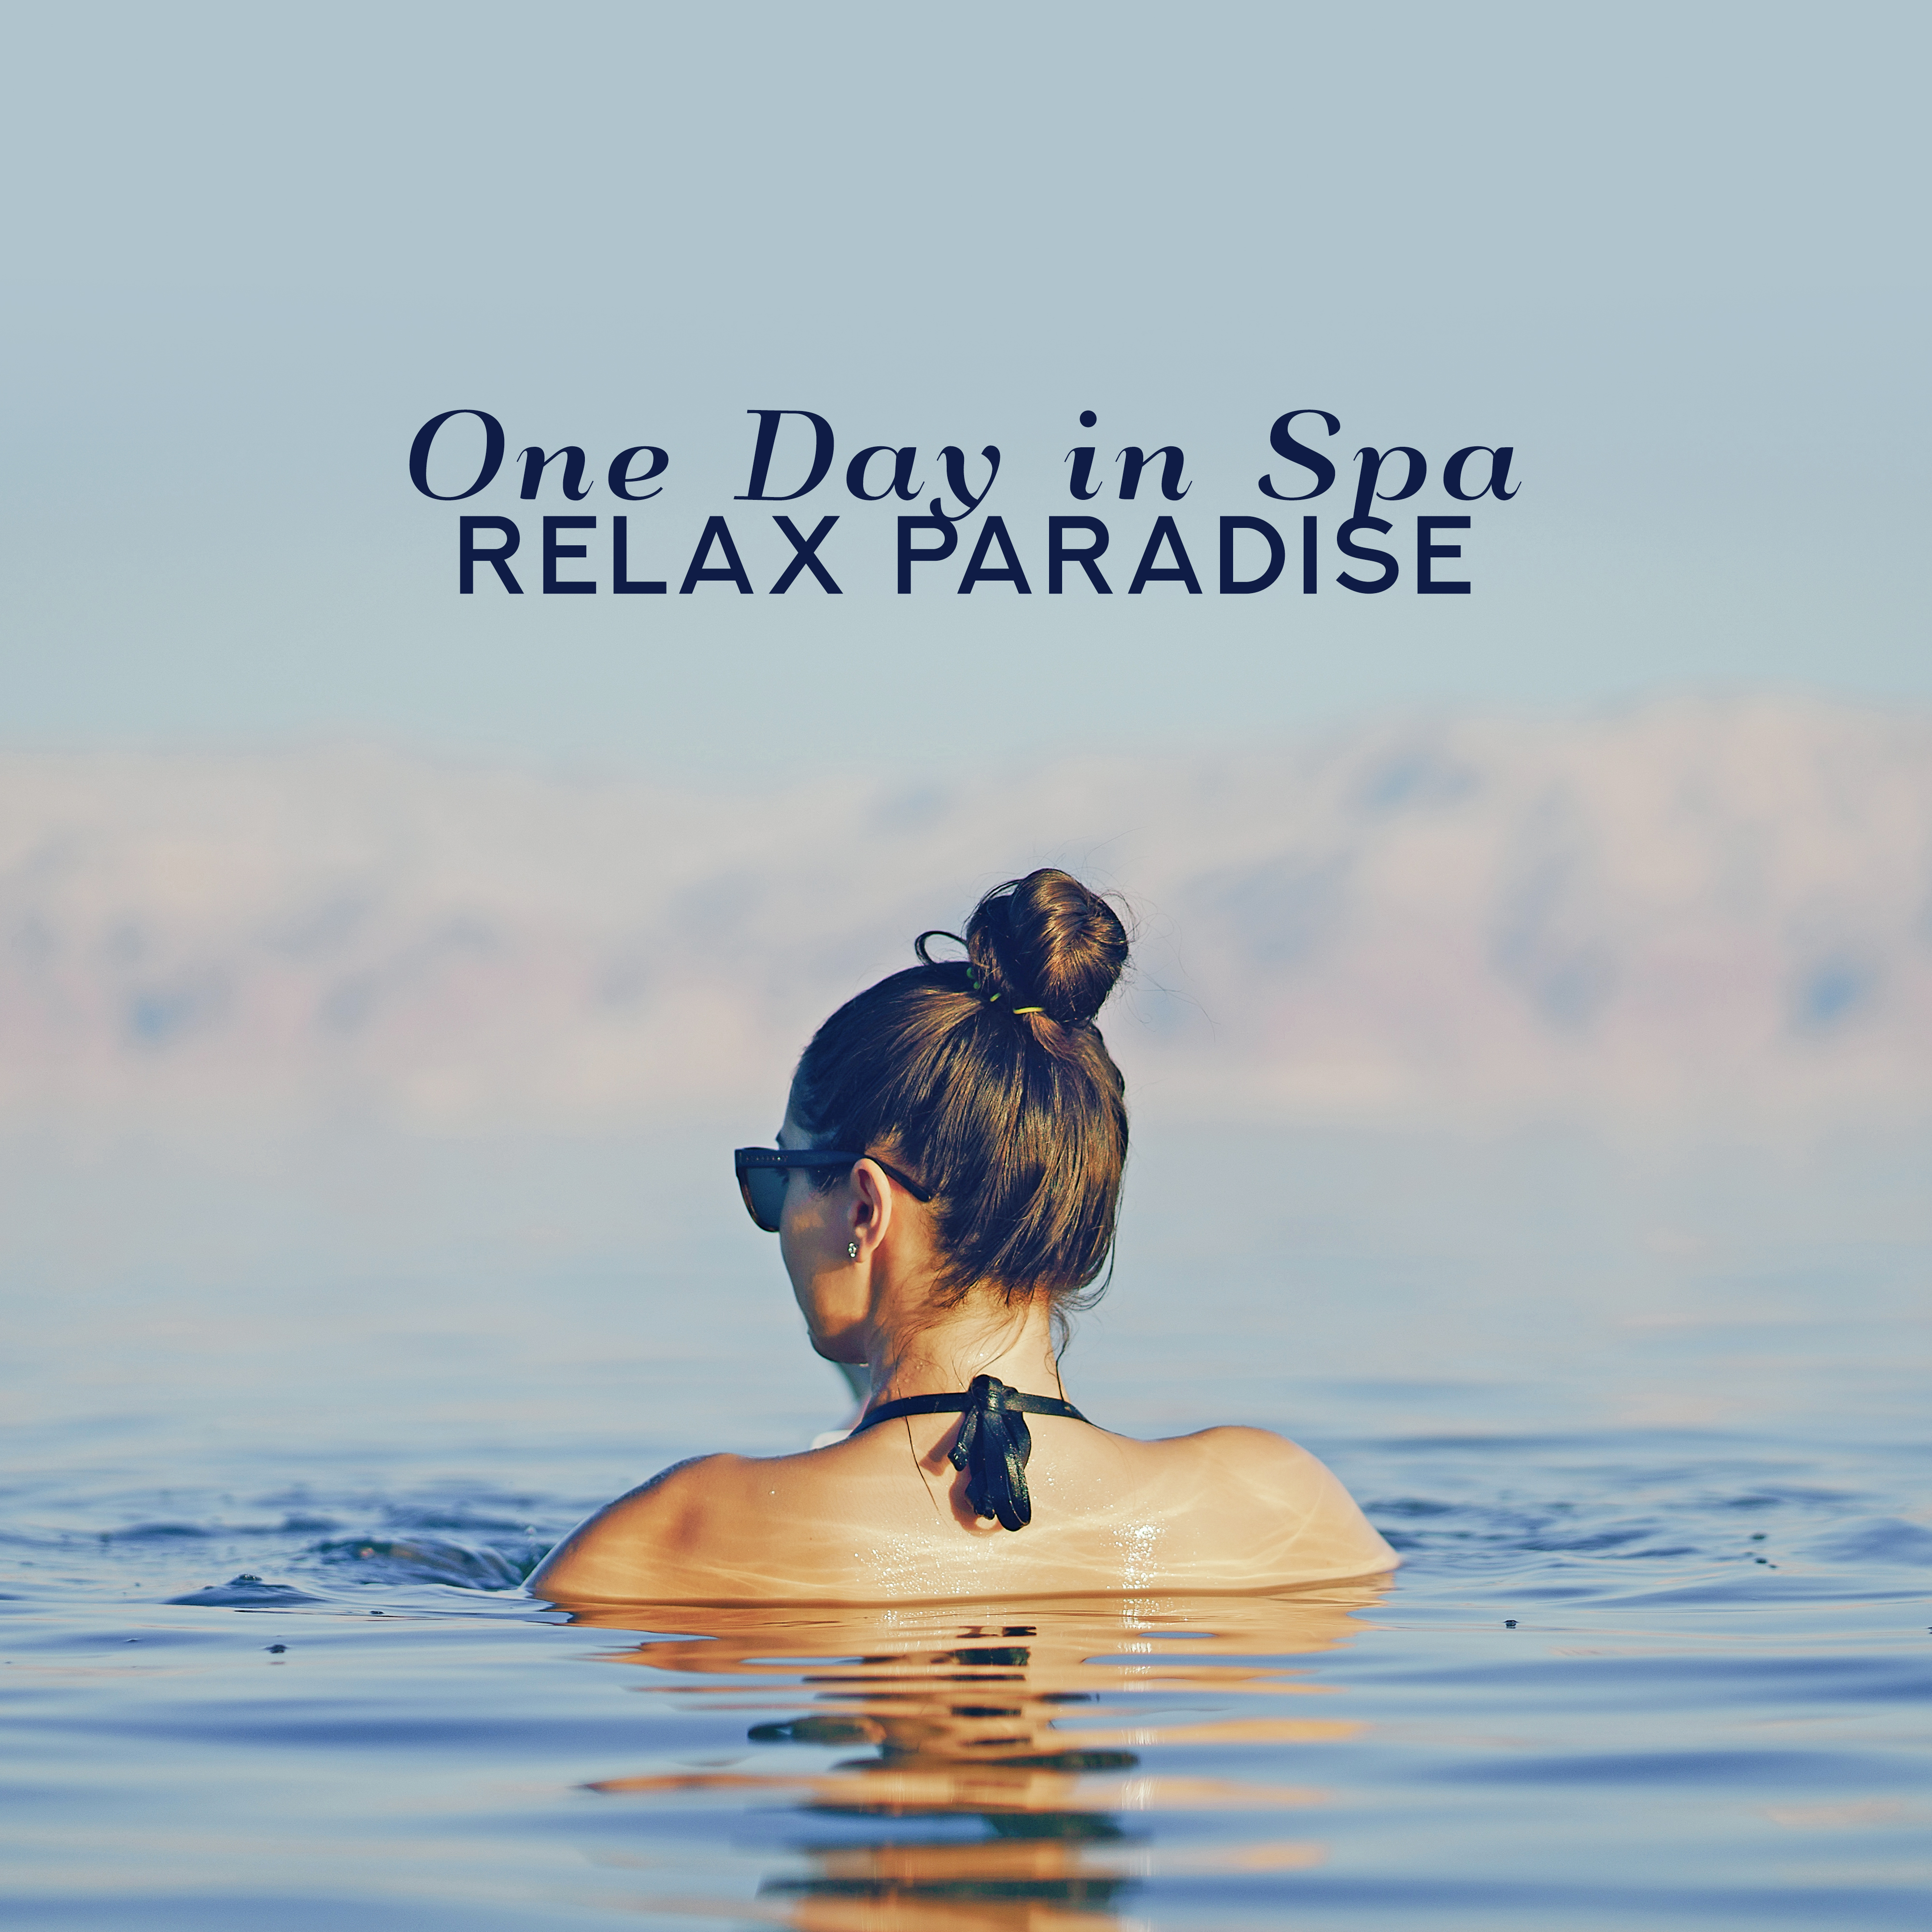 One Day in Spa Relax Paradise  New Age Music Compilation for Spa  Wellness, Massage  Relax Sounds